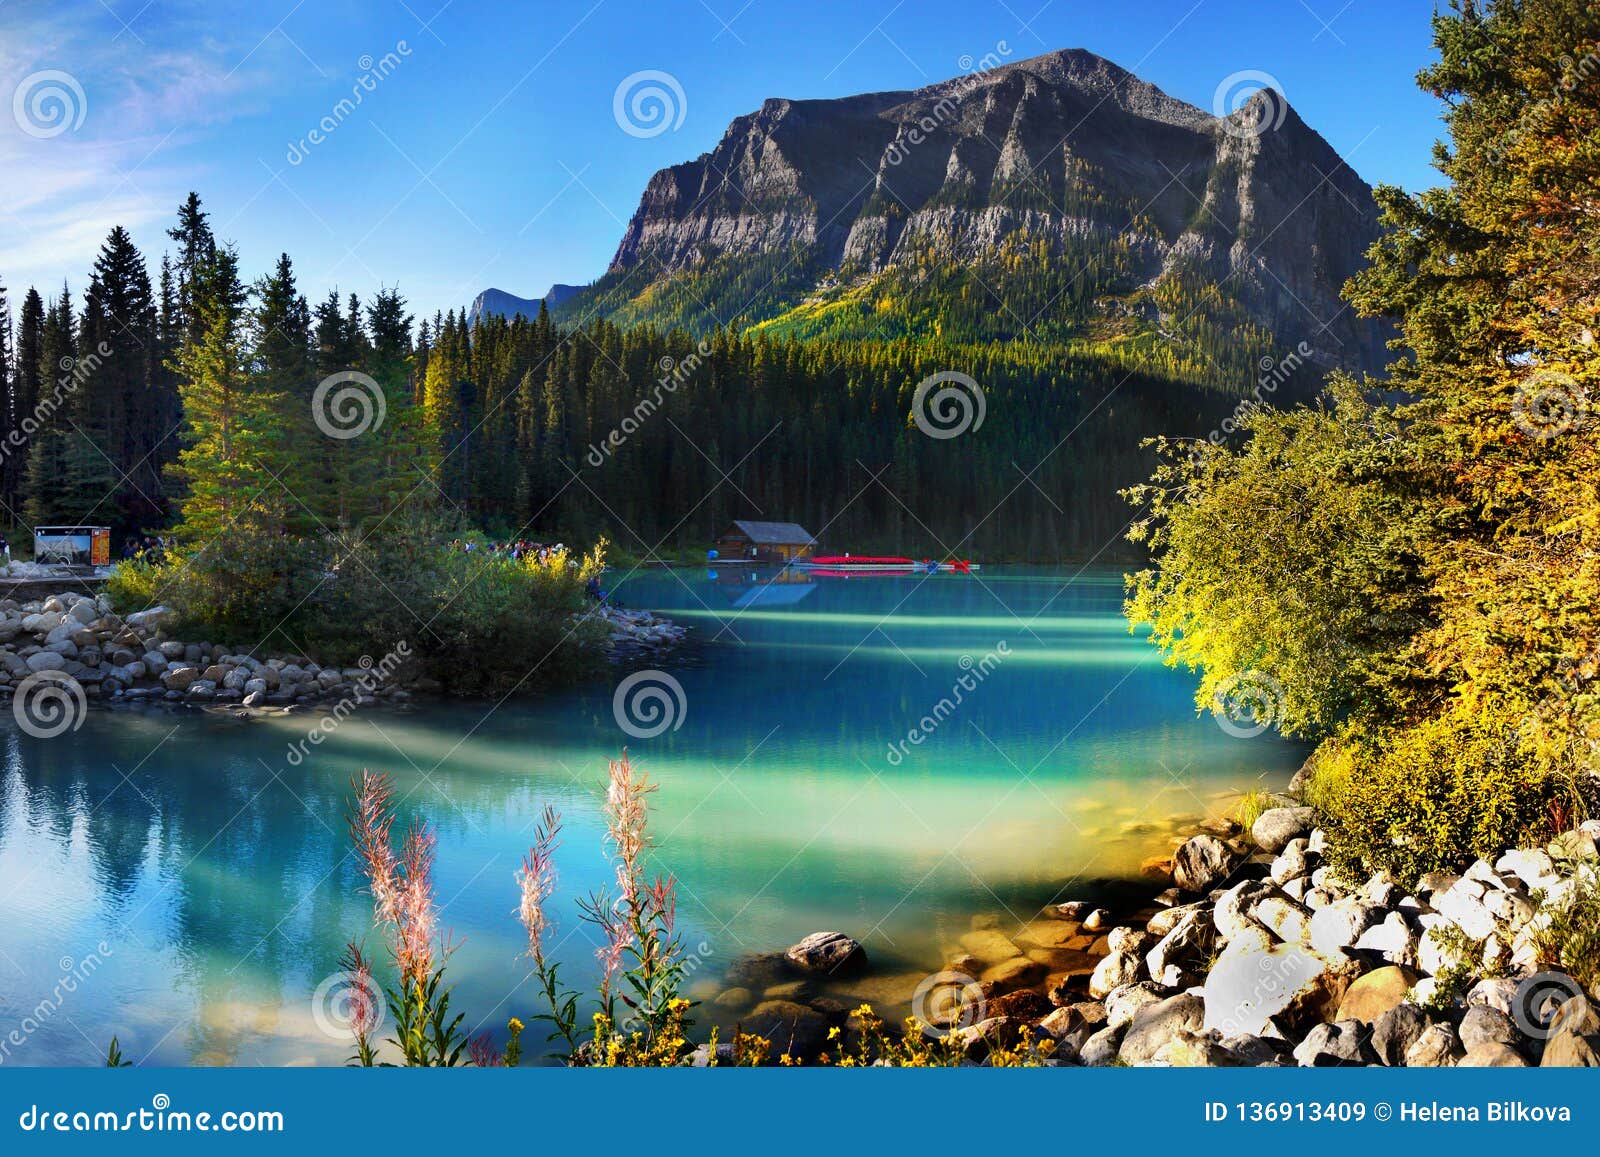 canadian national parks in alberta